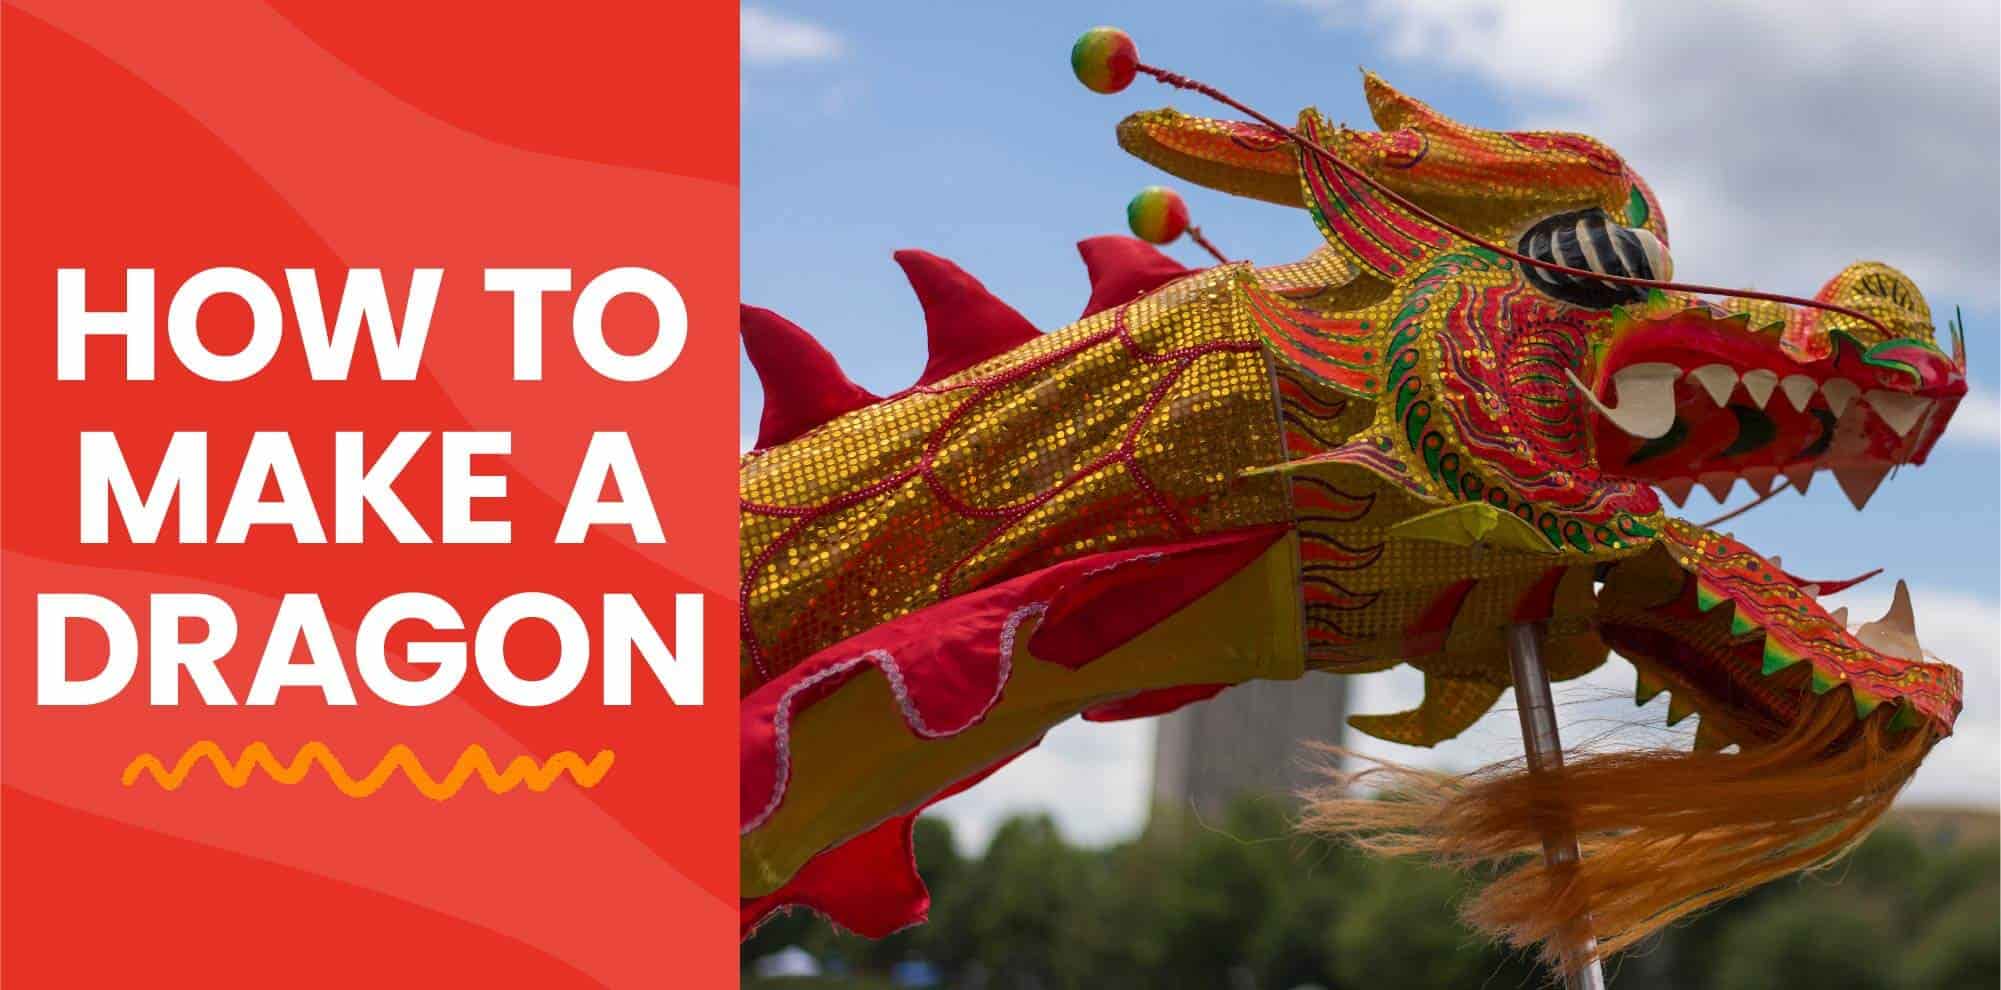 25 Easy DIY Dragon Crafts for Kids: How To Make a Dragon